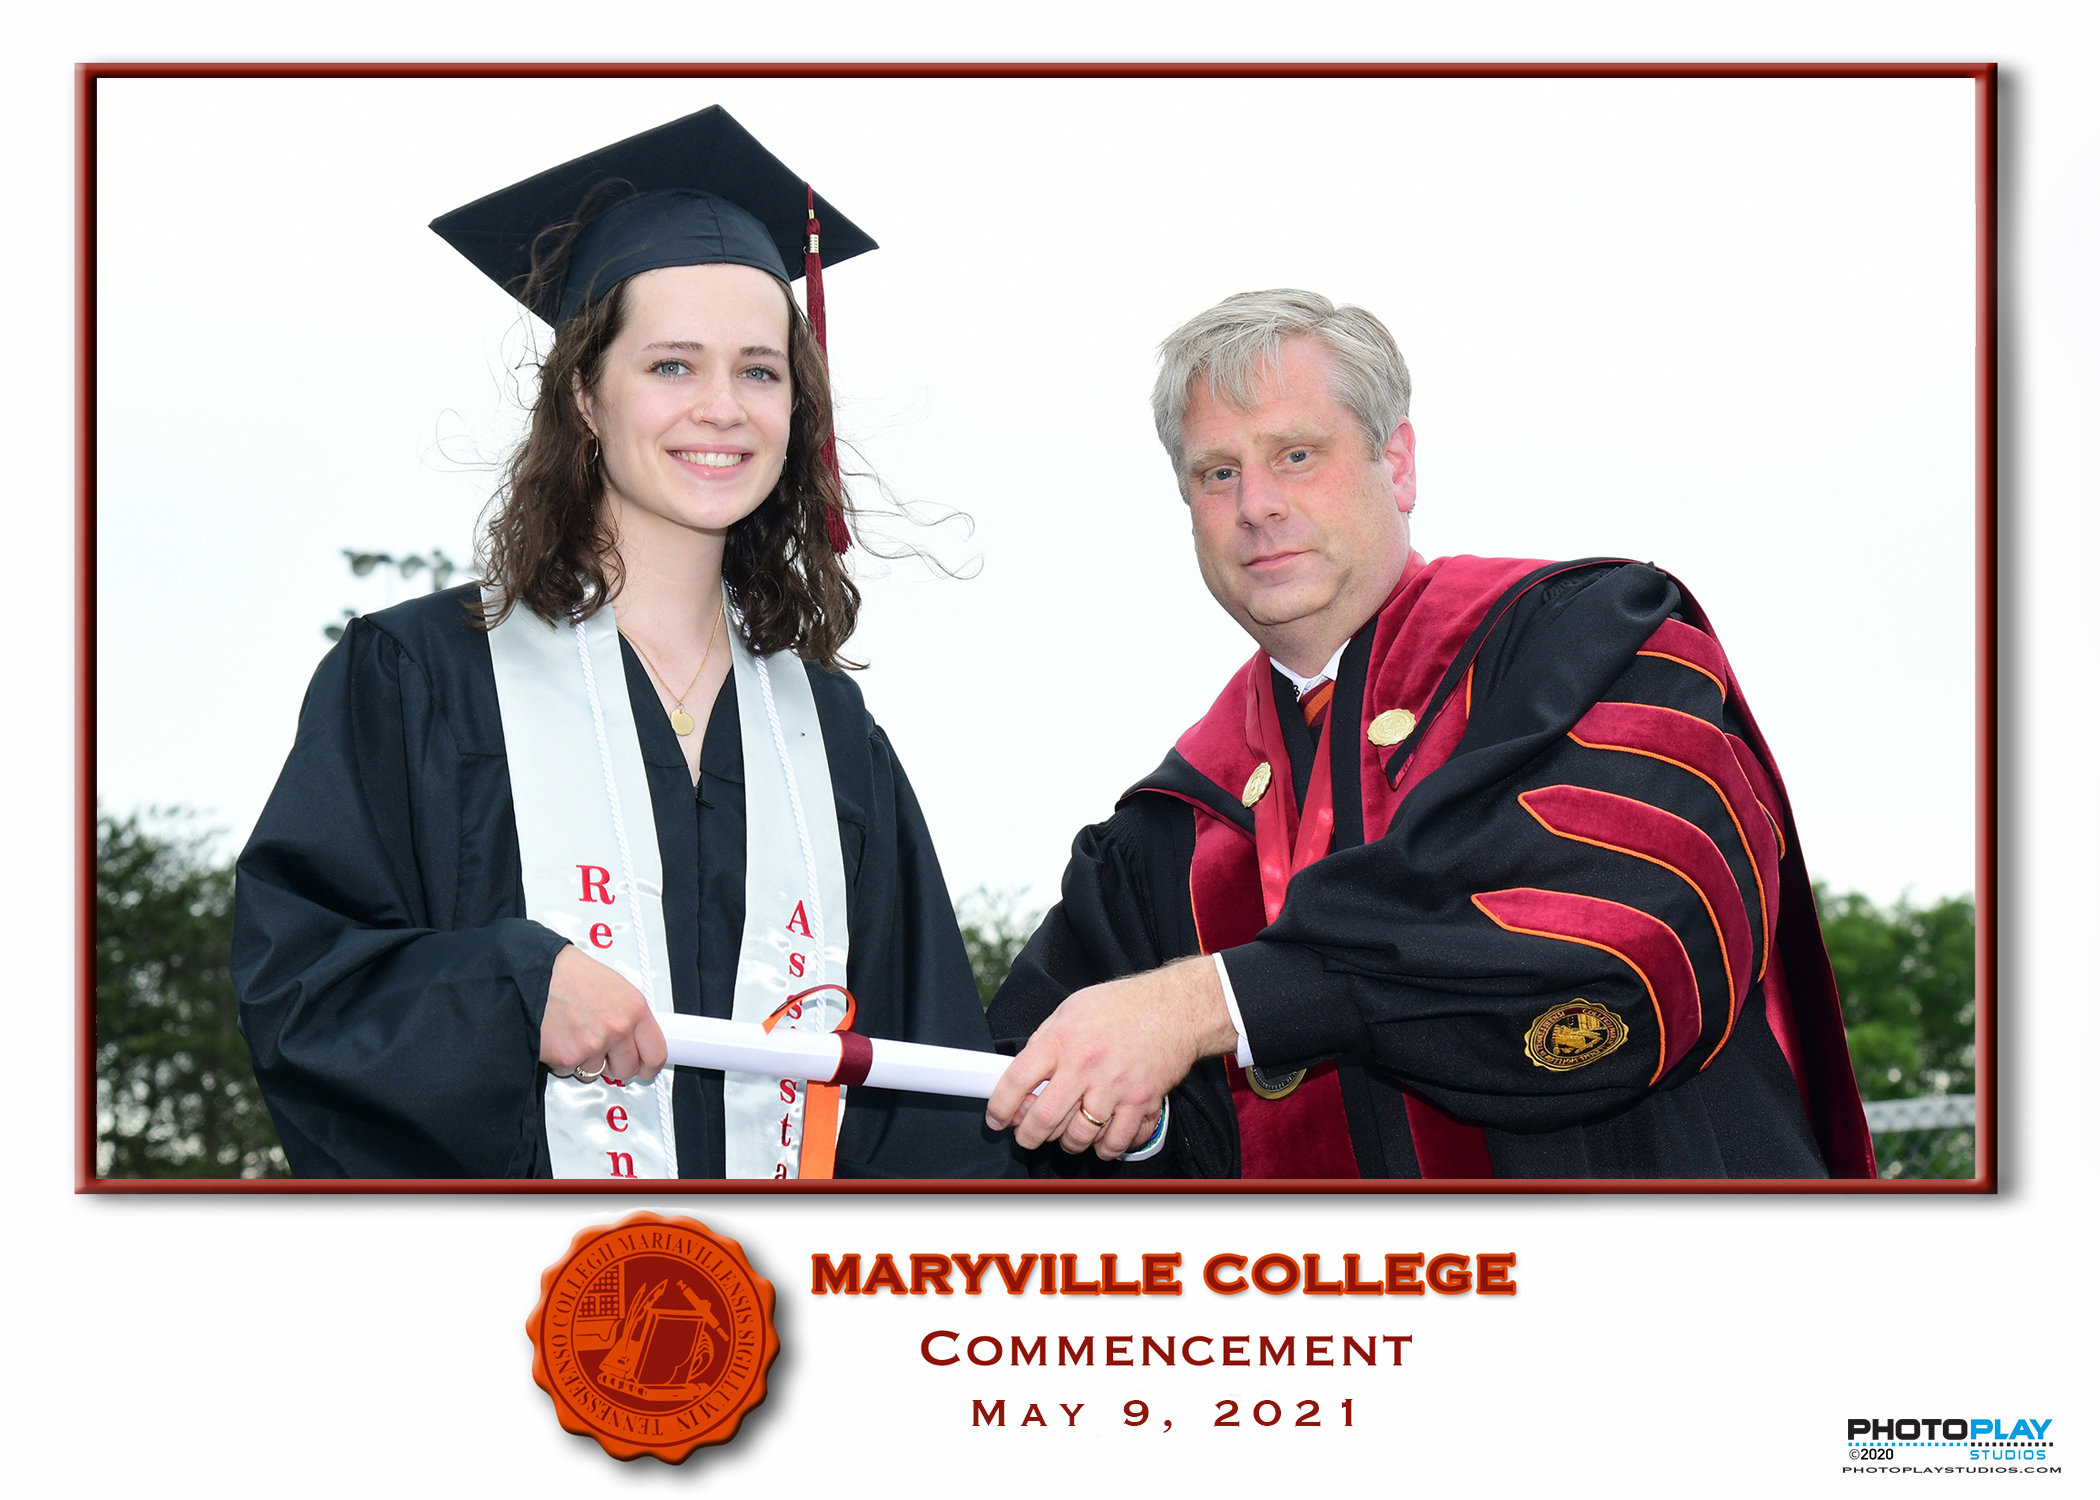 Maryville College Commencement by PhotoPlay Studios